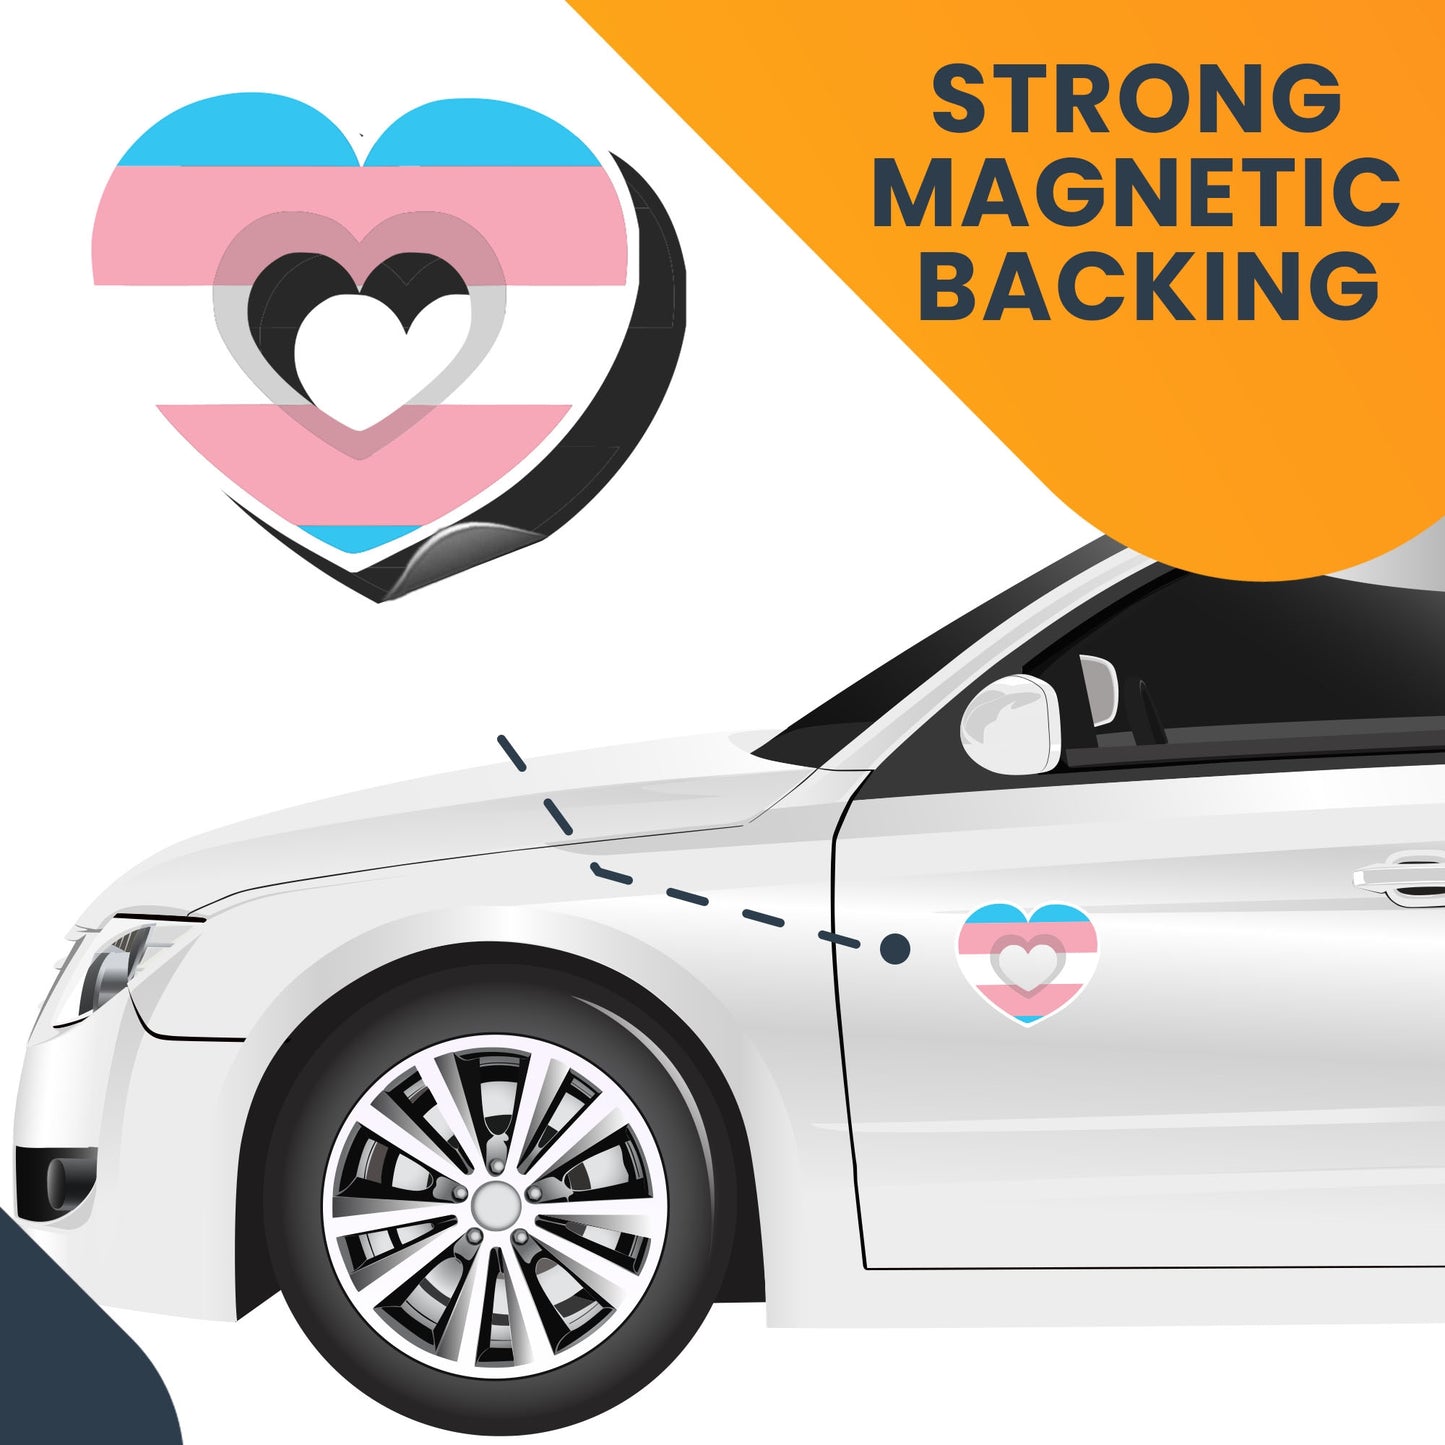 Magnet Me Up LGBTQA LGBTQ Transgender Pride Flag Heart Magnet Decal, 4.5x5 Inch, Support Gay Pride and Equality, Love Conquers All, Automotive Magnet for Car, Truck, Made in USA